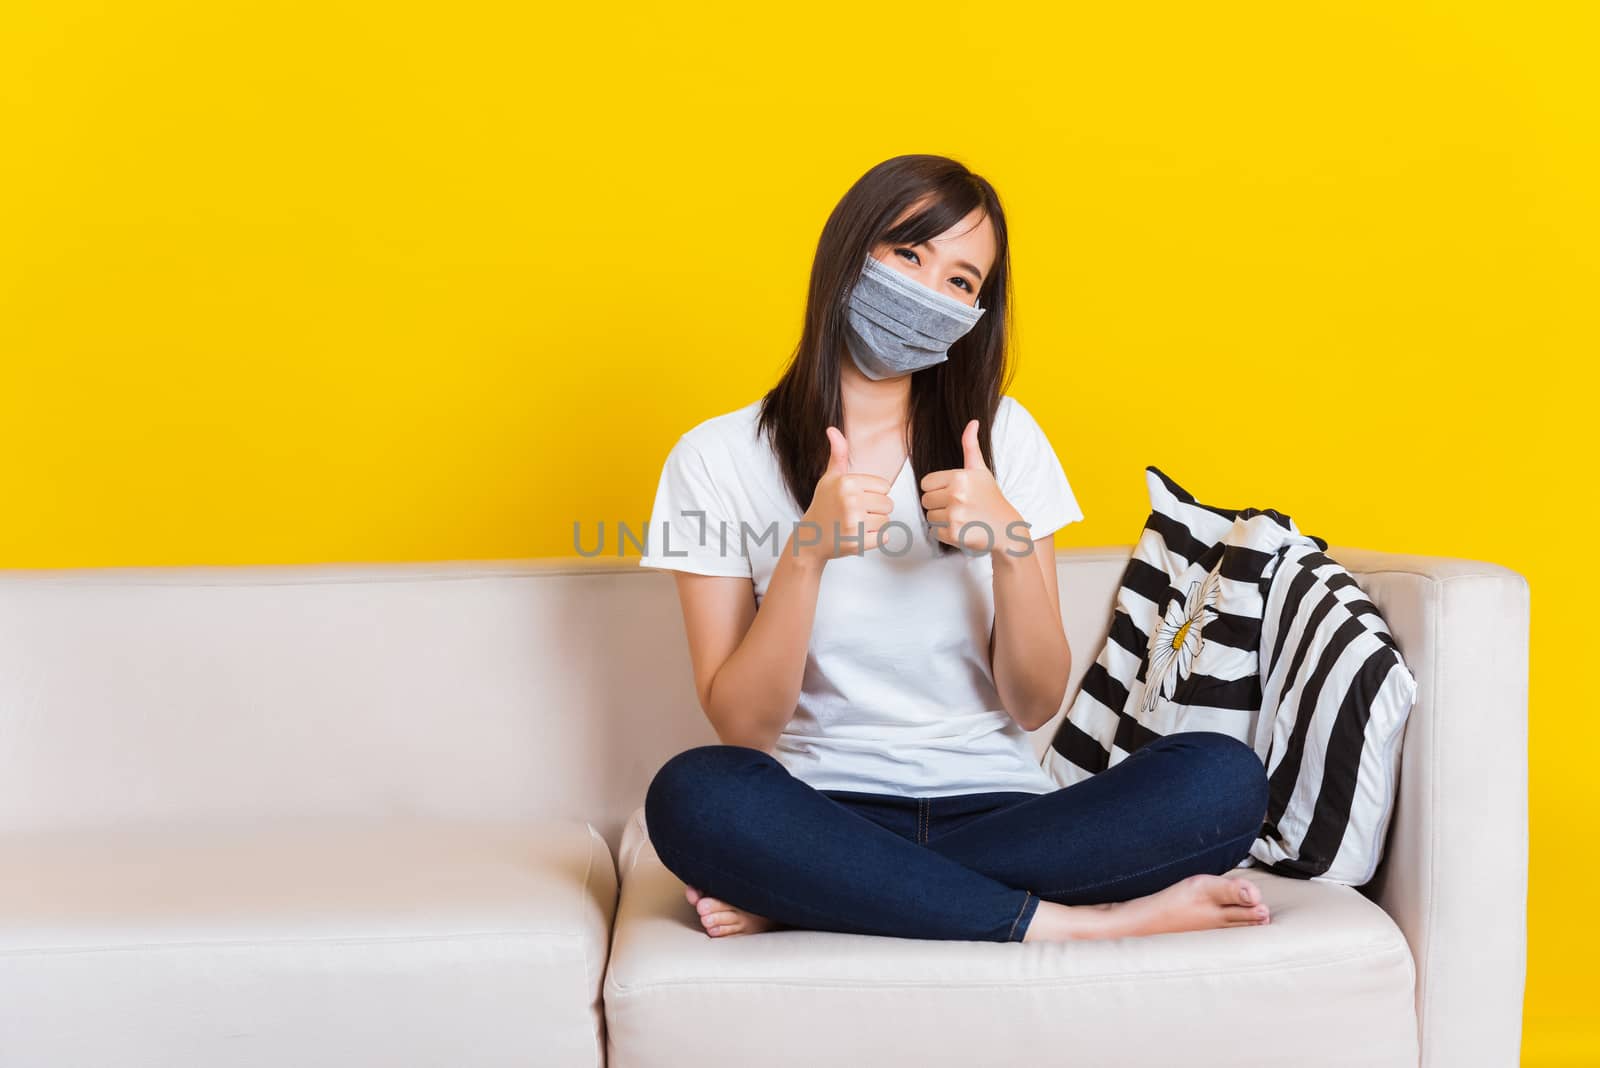 Young woman sitting on sofa wearing medical face mask protective by Sorapop